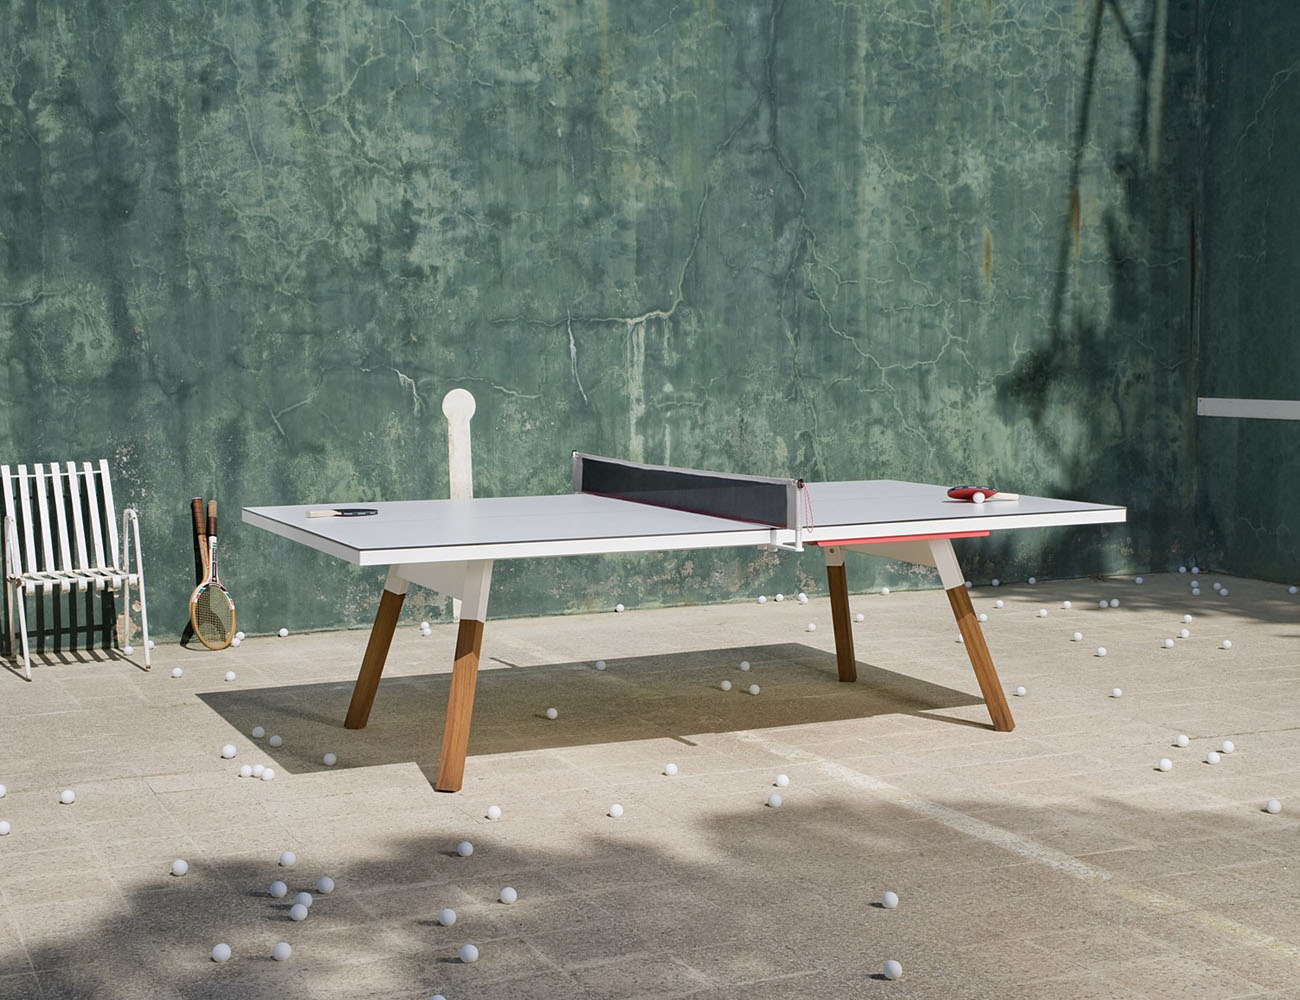 You and Me Ping Pong Table – Works As A Dining Table Too